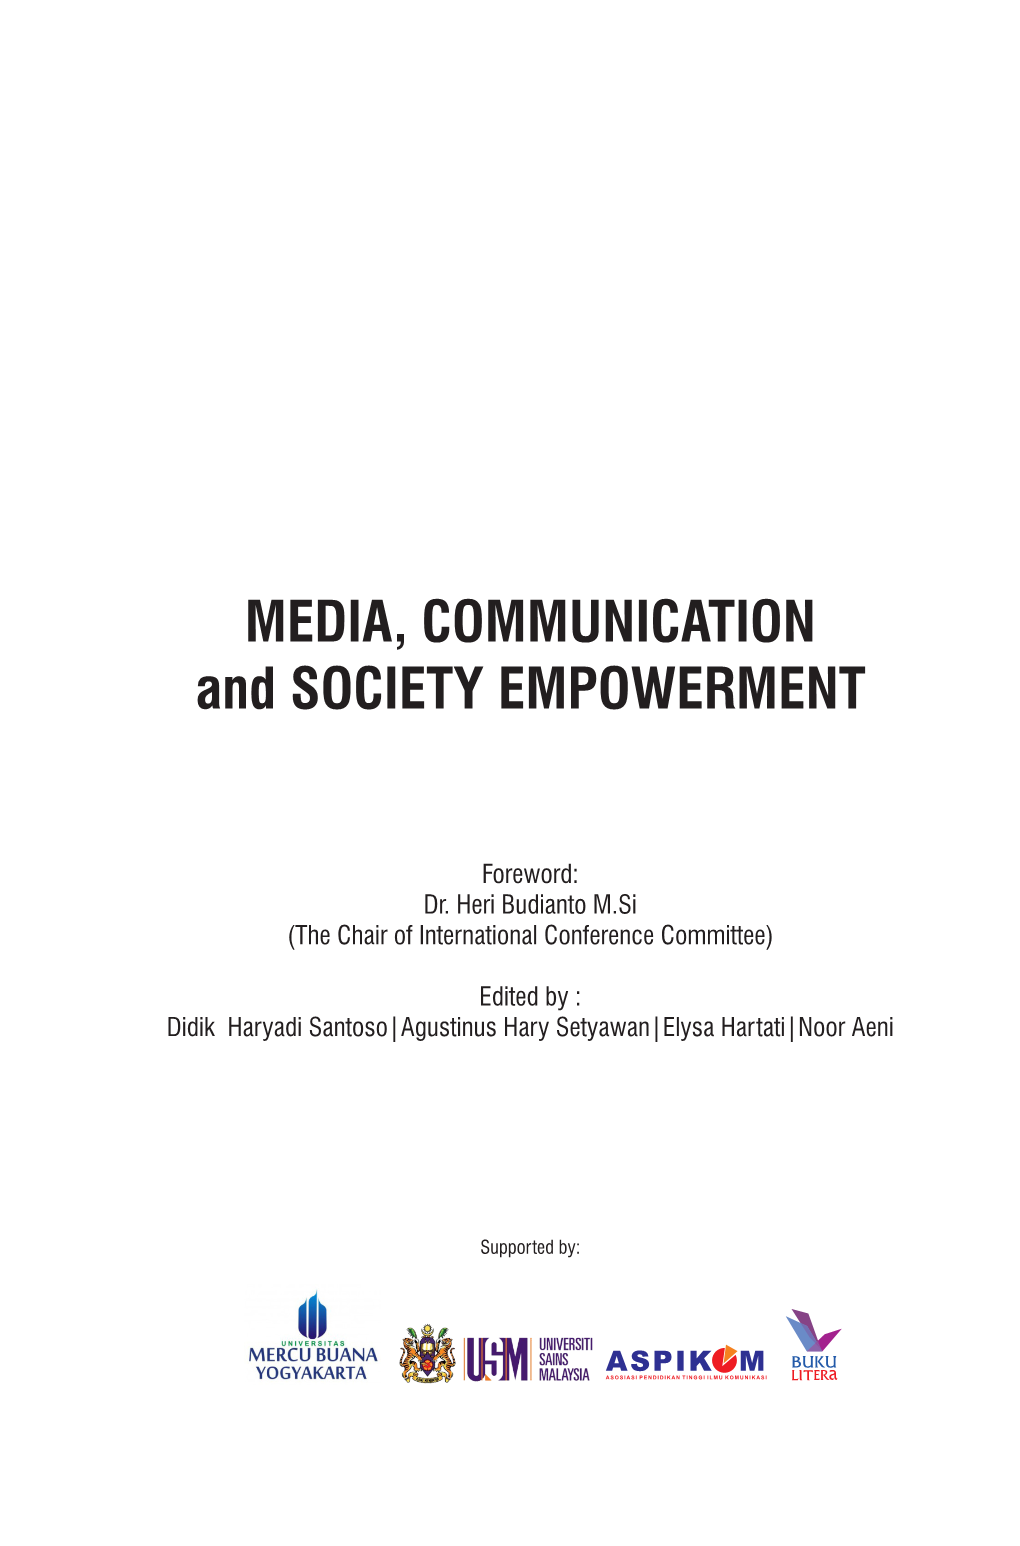 MEDIA, COMMUNICATION and SOCIETY EMPOWERMENT